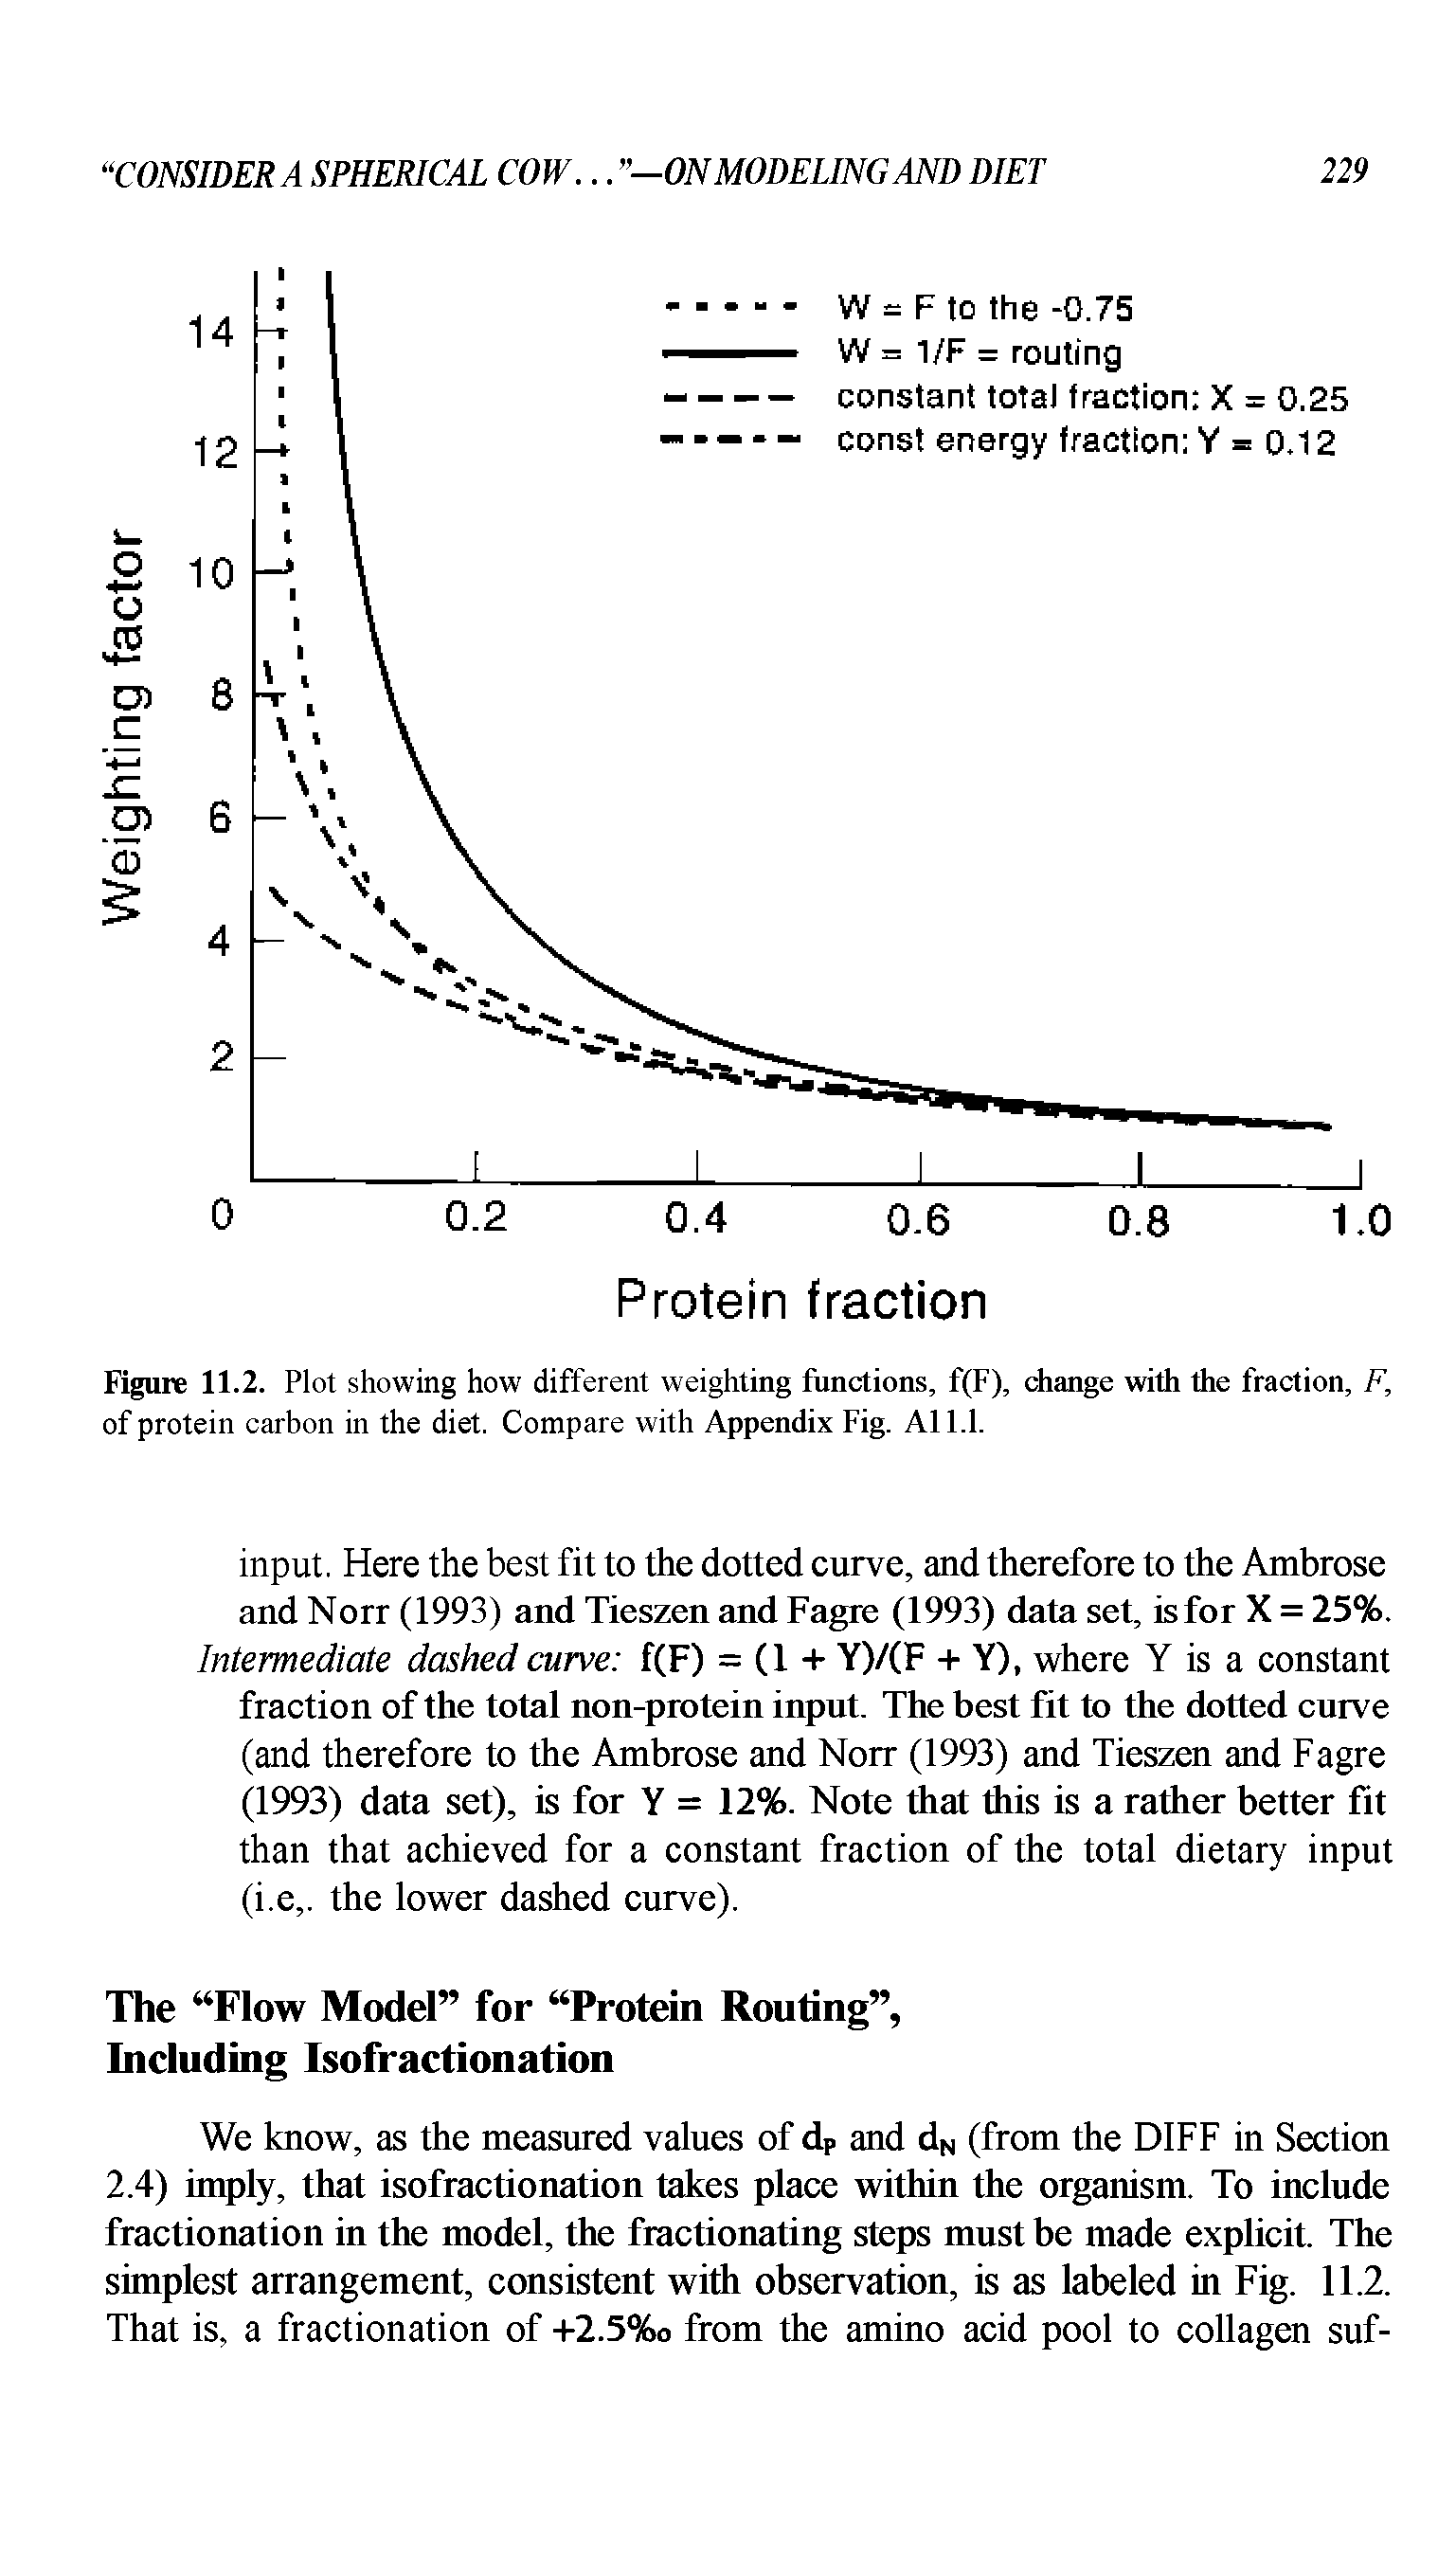 Figure 11.2. Plot showing how different weighting functions, f(F), change with the fraction, F, of protein carbon in the diet. Compare with Appendix Fig. All.l.